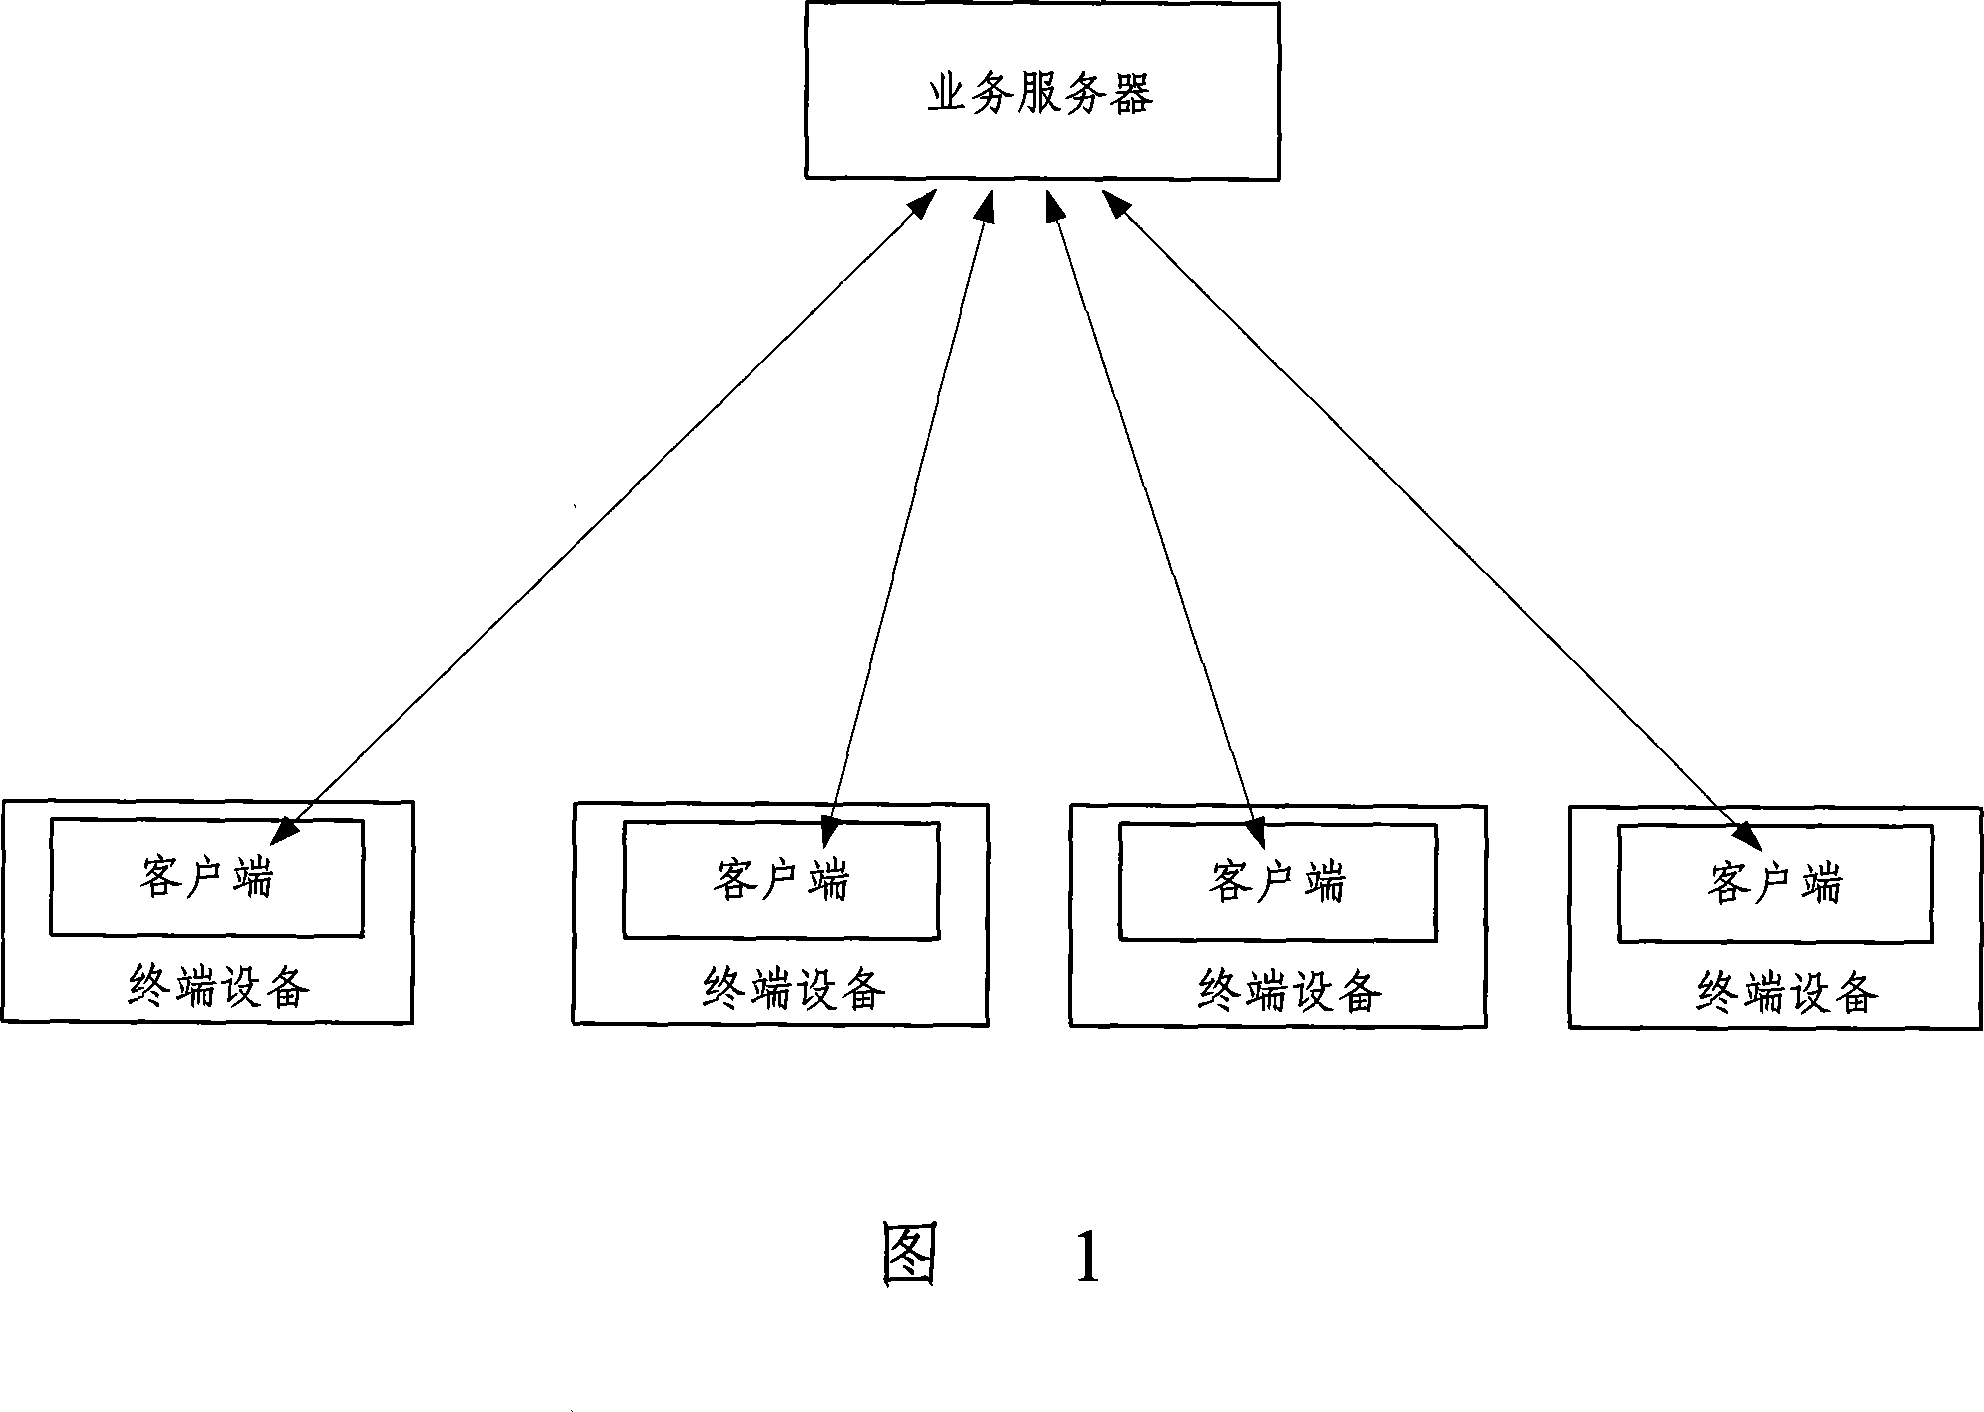 System and method for publishing internet information